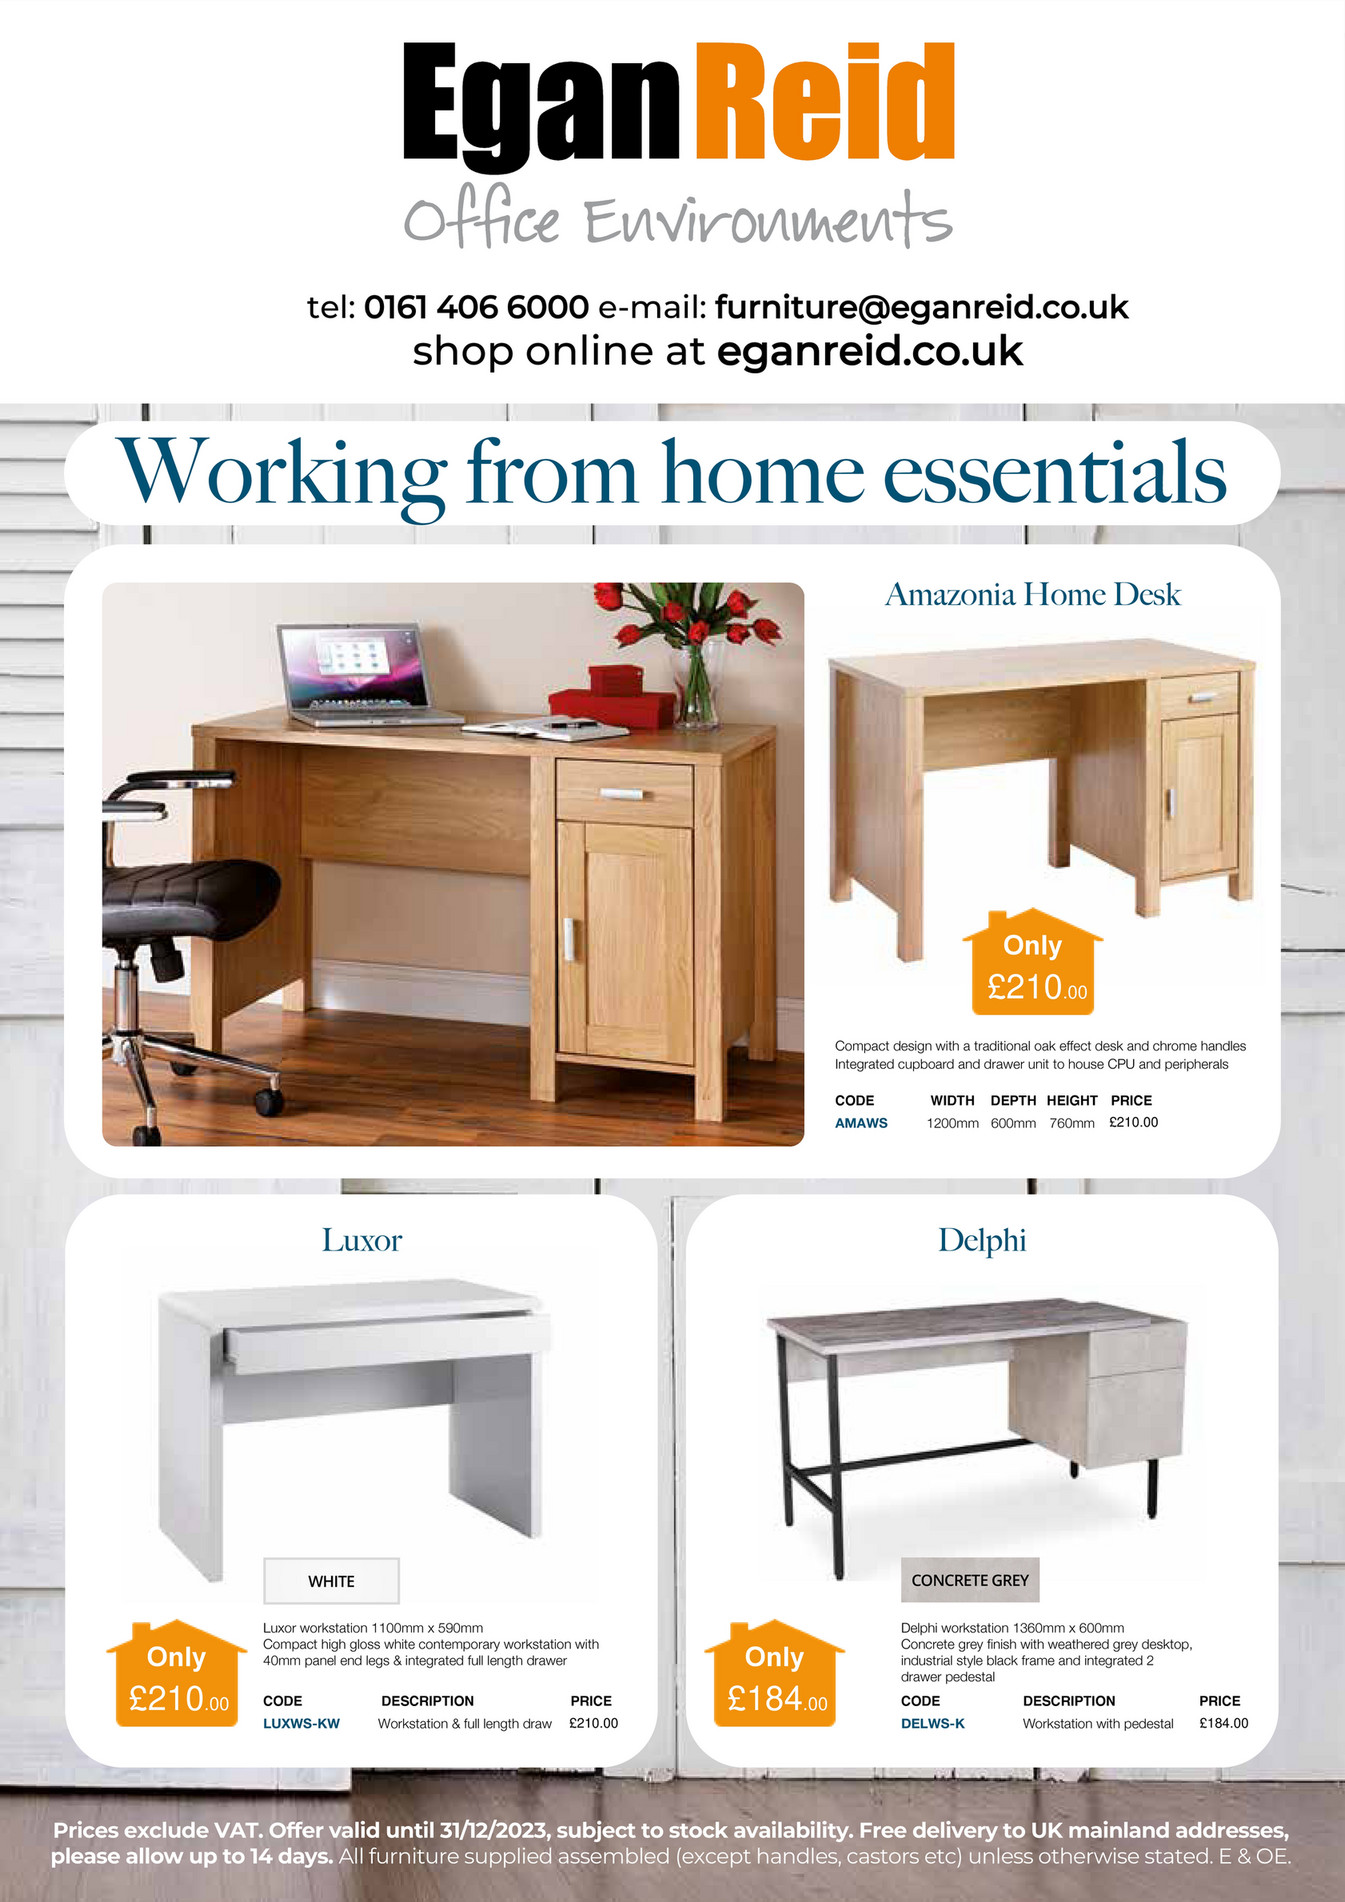 Egan Reid - Work at Home - Home office furniture - Page 1